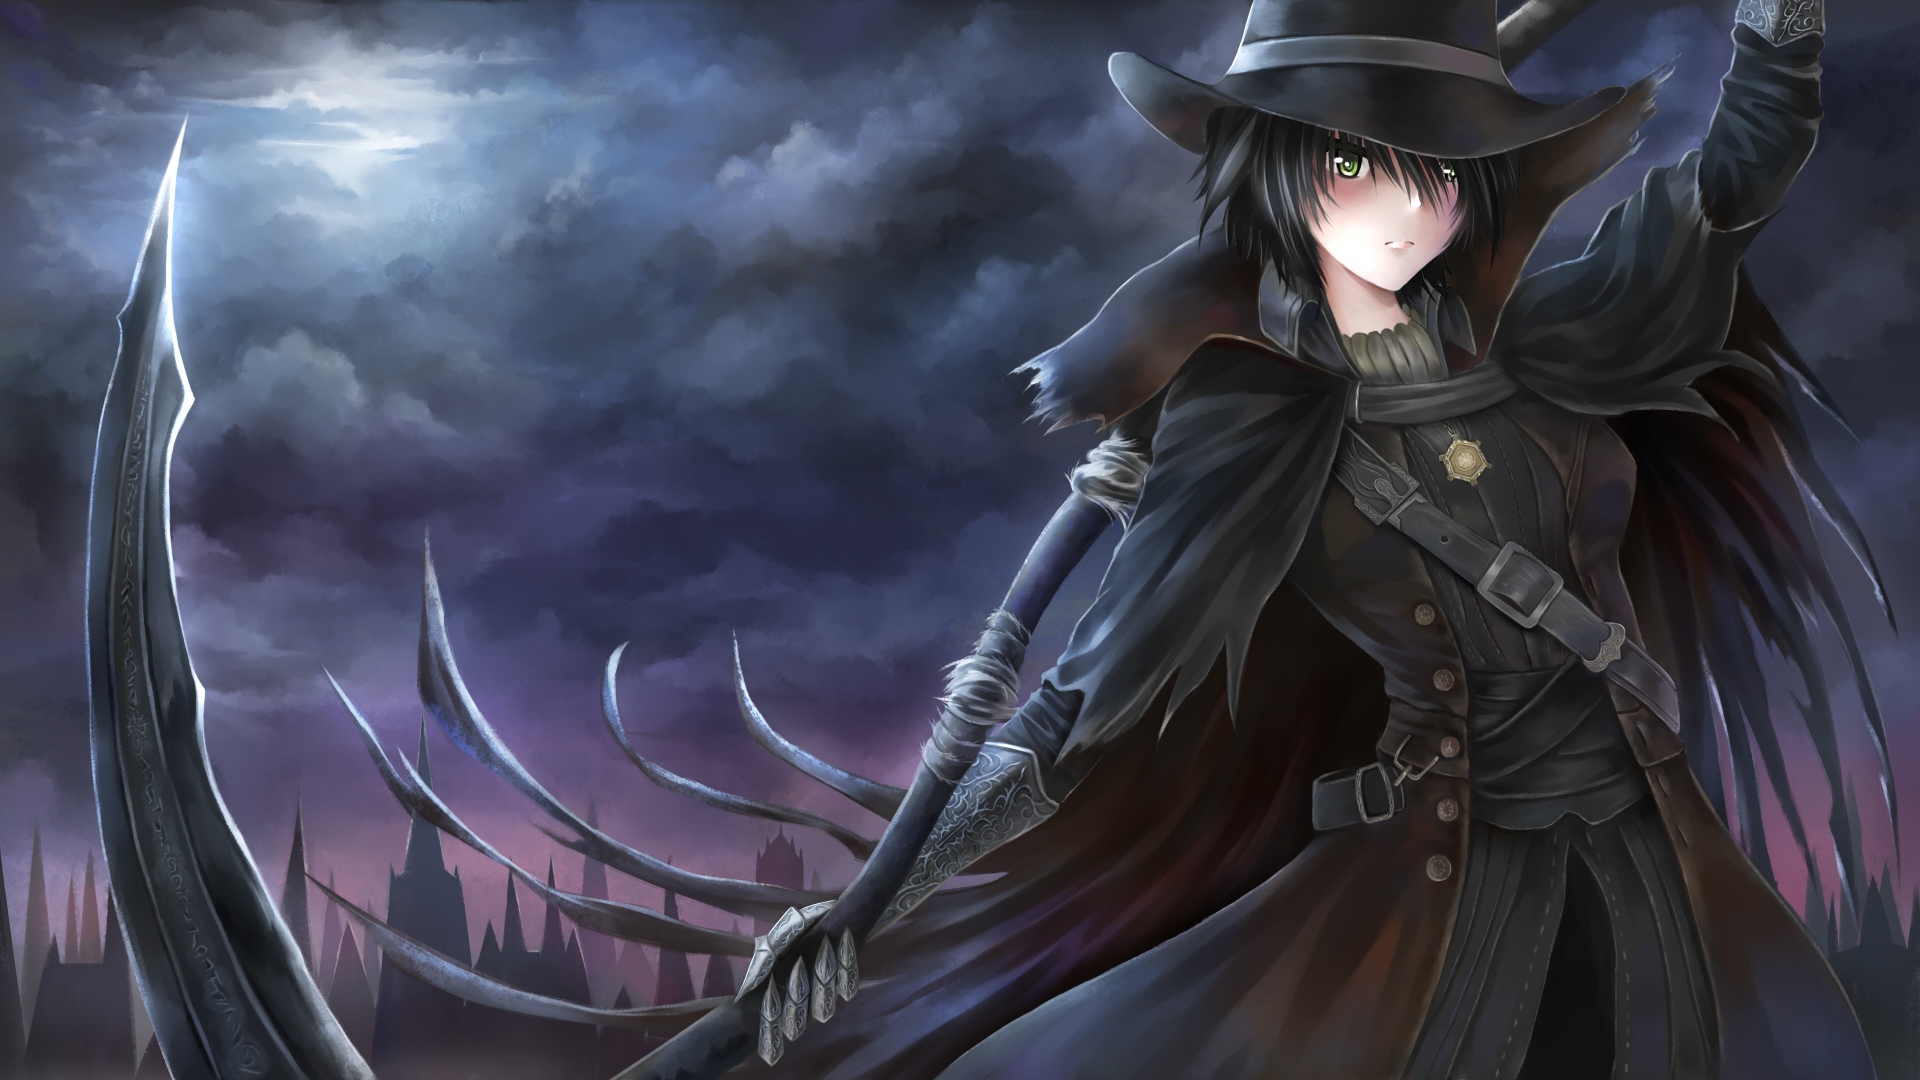 Man in black anime character Bloodborne 